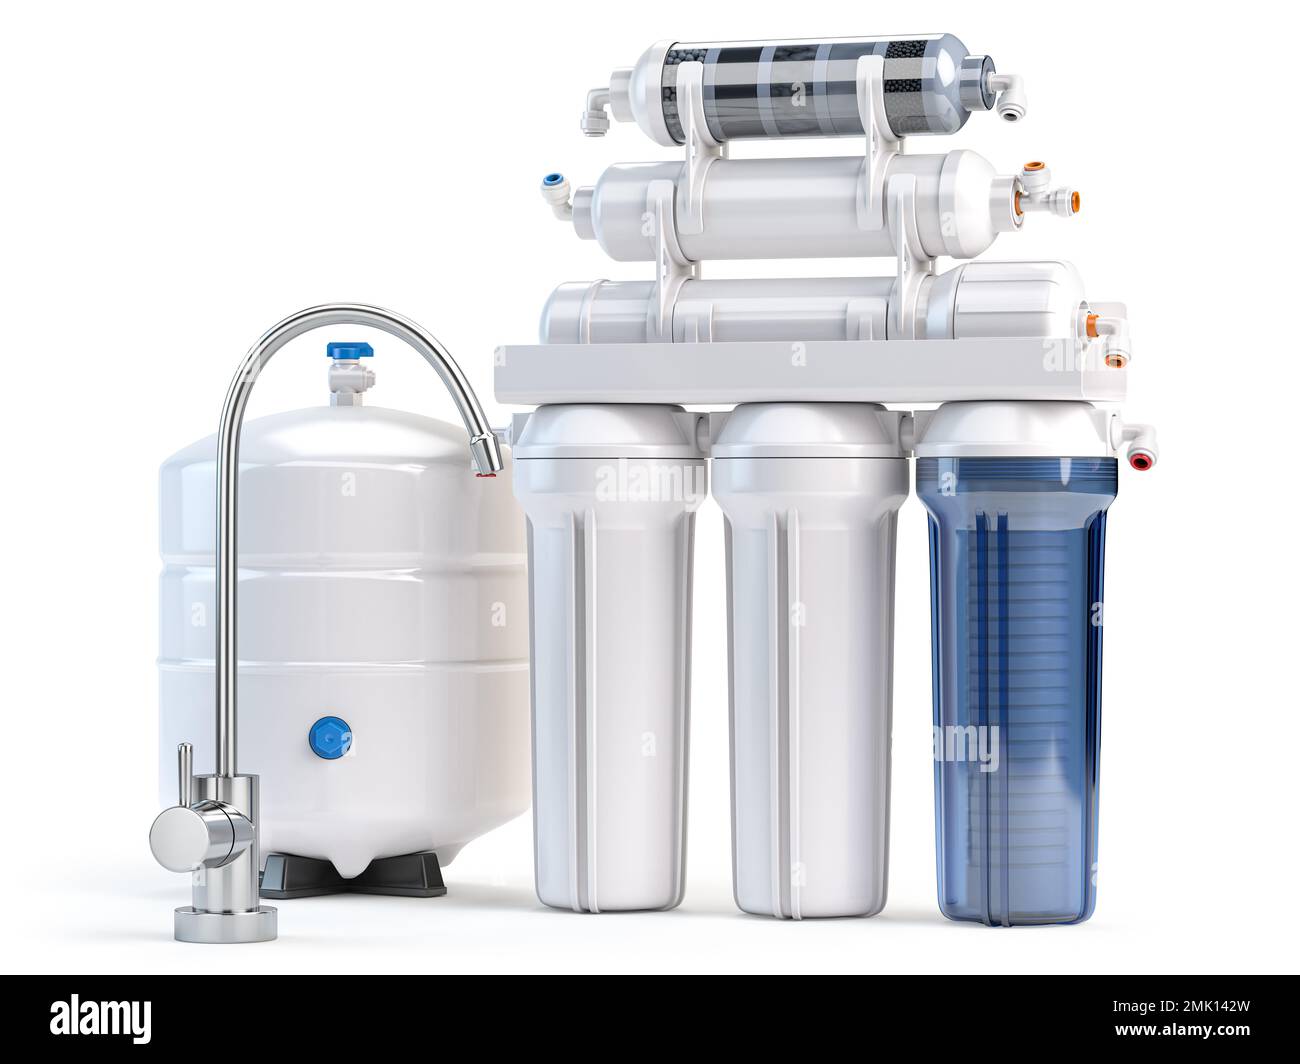 Reverse osmosis water purification system isolaterd on white. Water cleaning system. 3d illustration Stock Photo